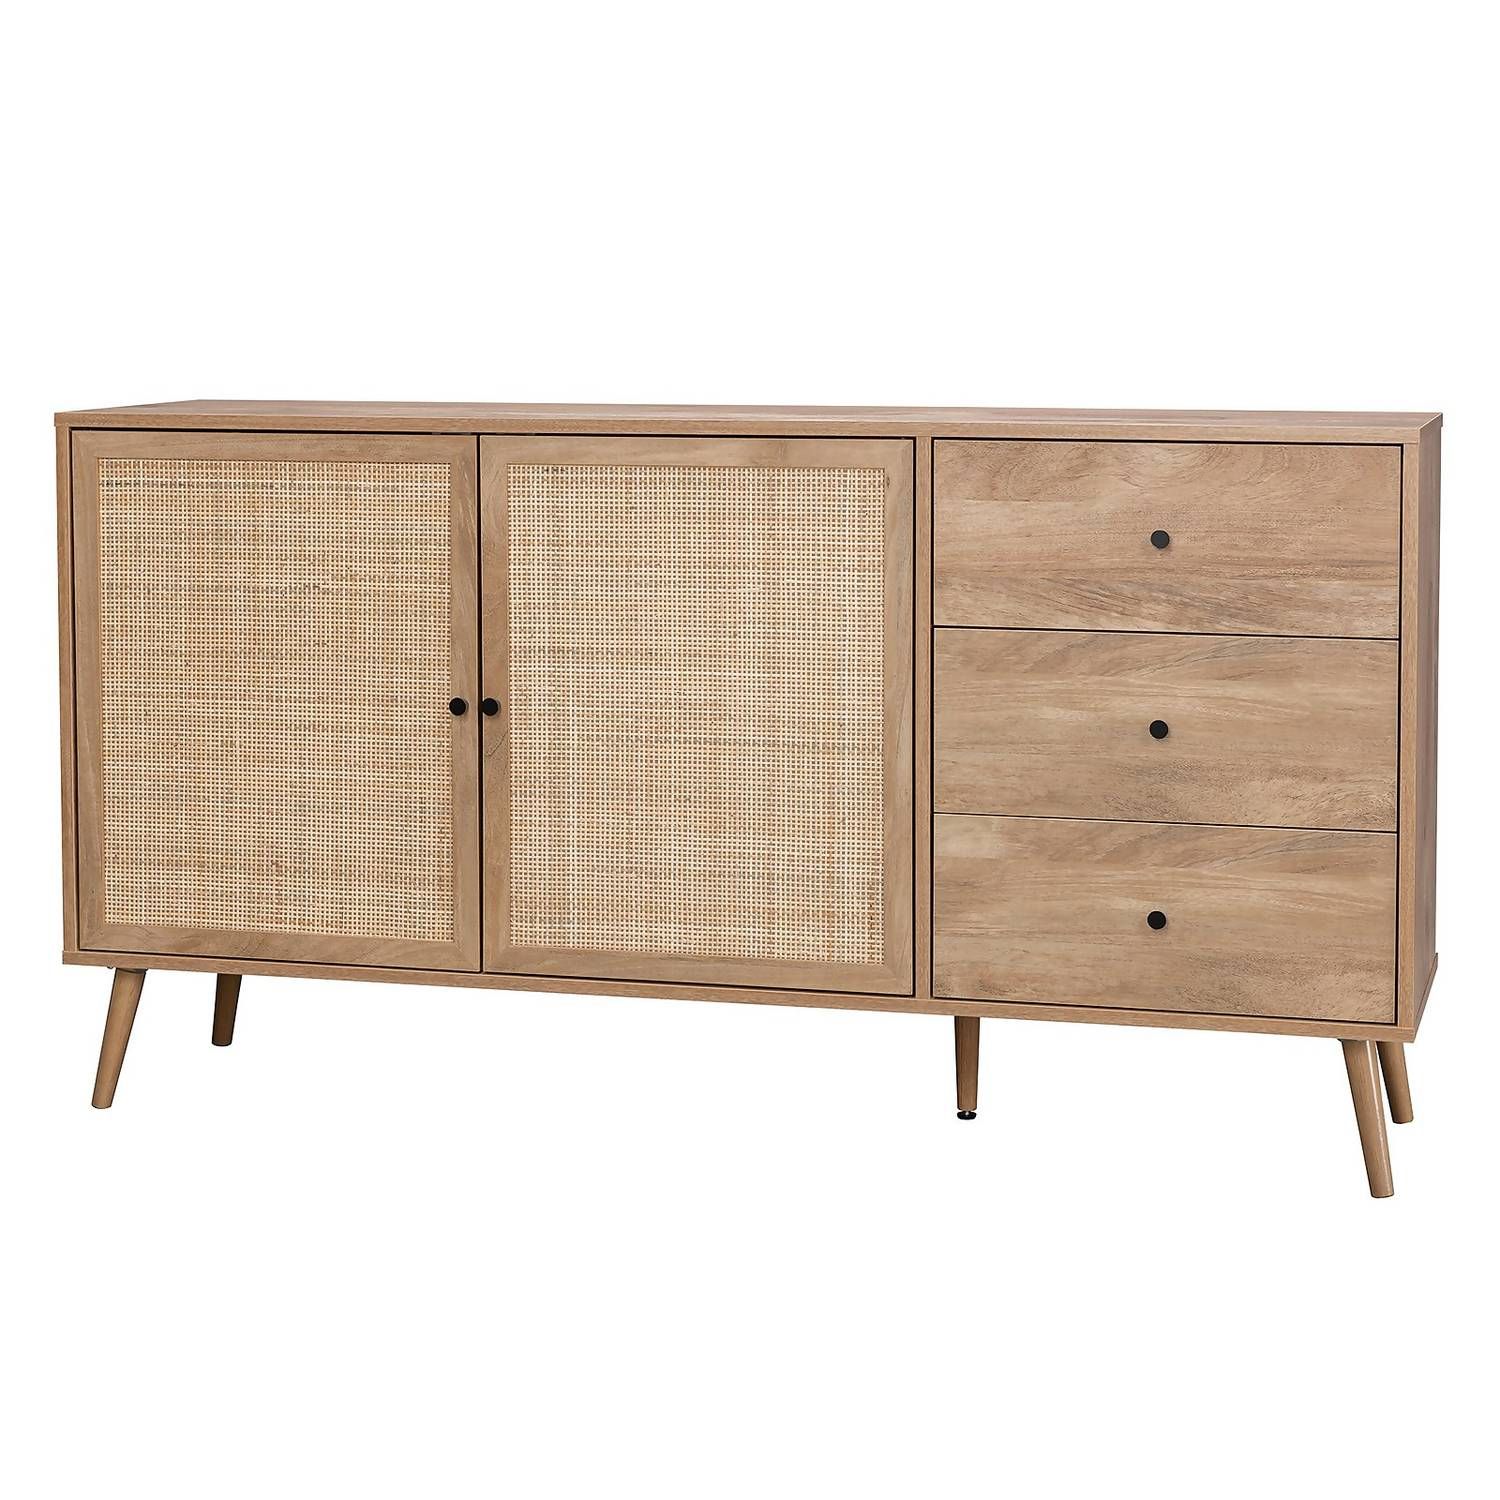 Kubu Rattan Large Sideboard | Homebase With Regard To Most Recent Assembled Rattan Sideboards (View 5 of 15)